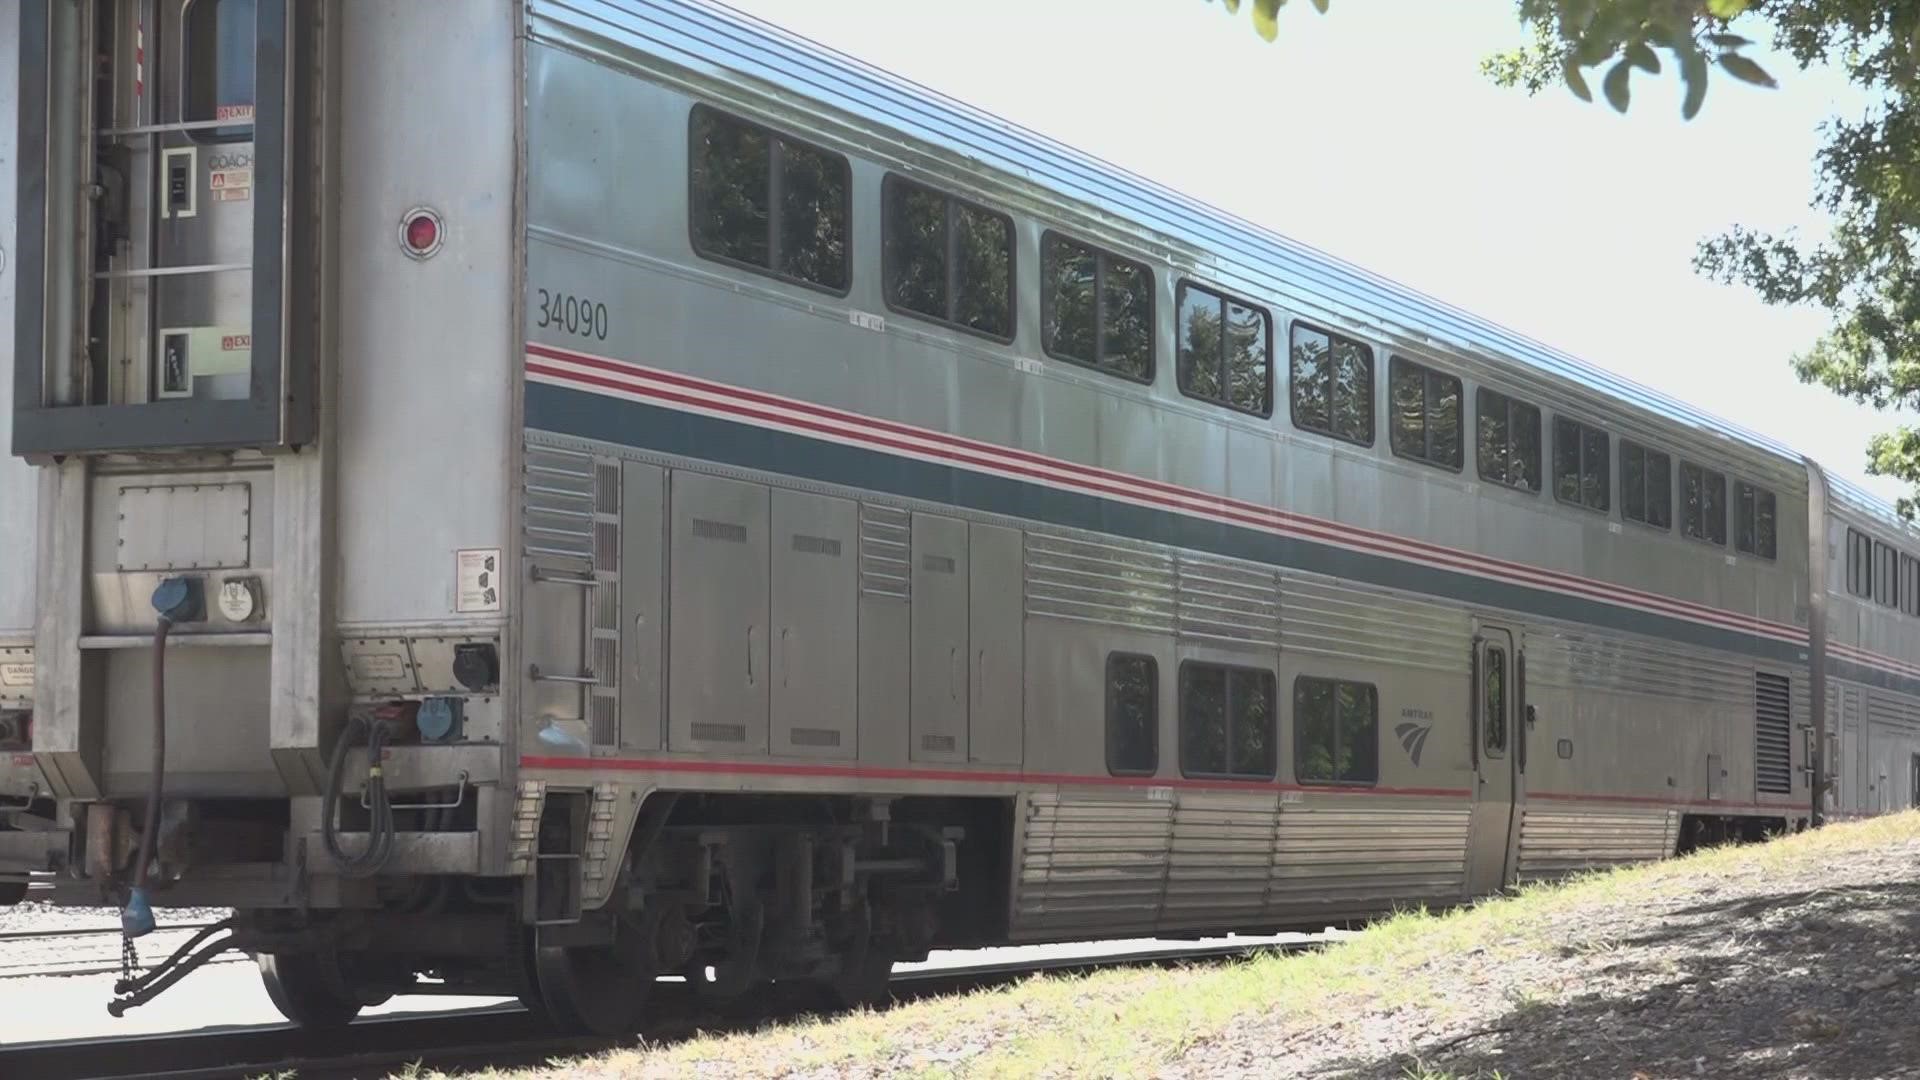 The rail options would connect the other major Texas cities to San Antonio.